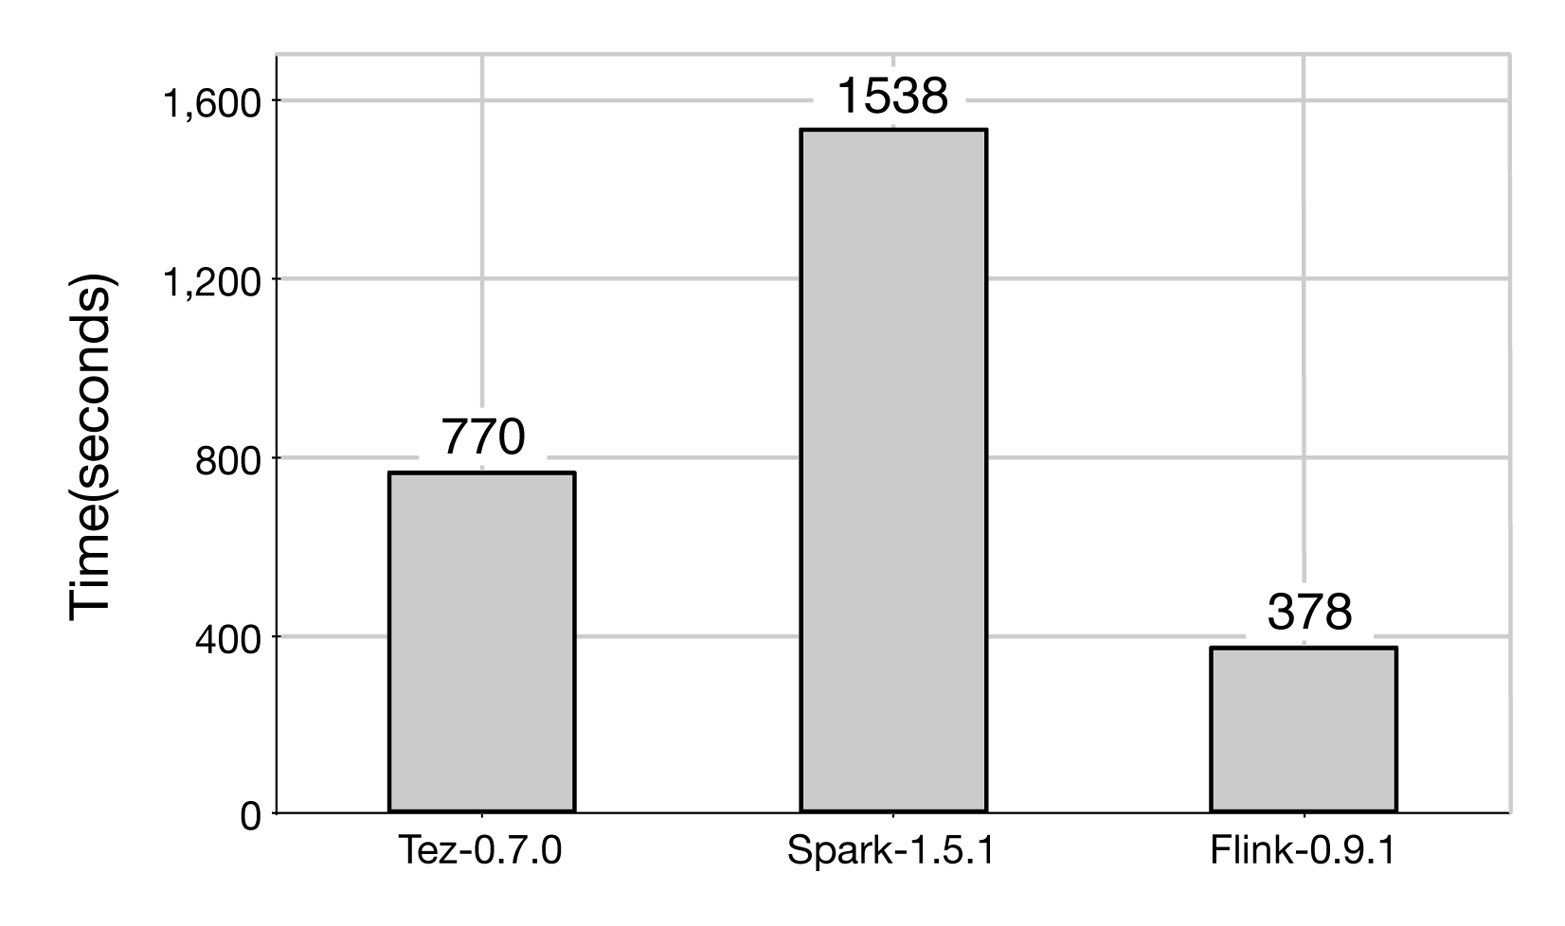 HashJoin results for Tez, Spark, and Flink.